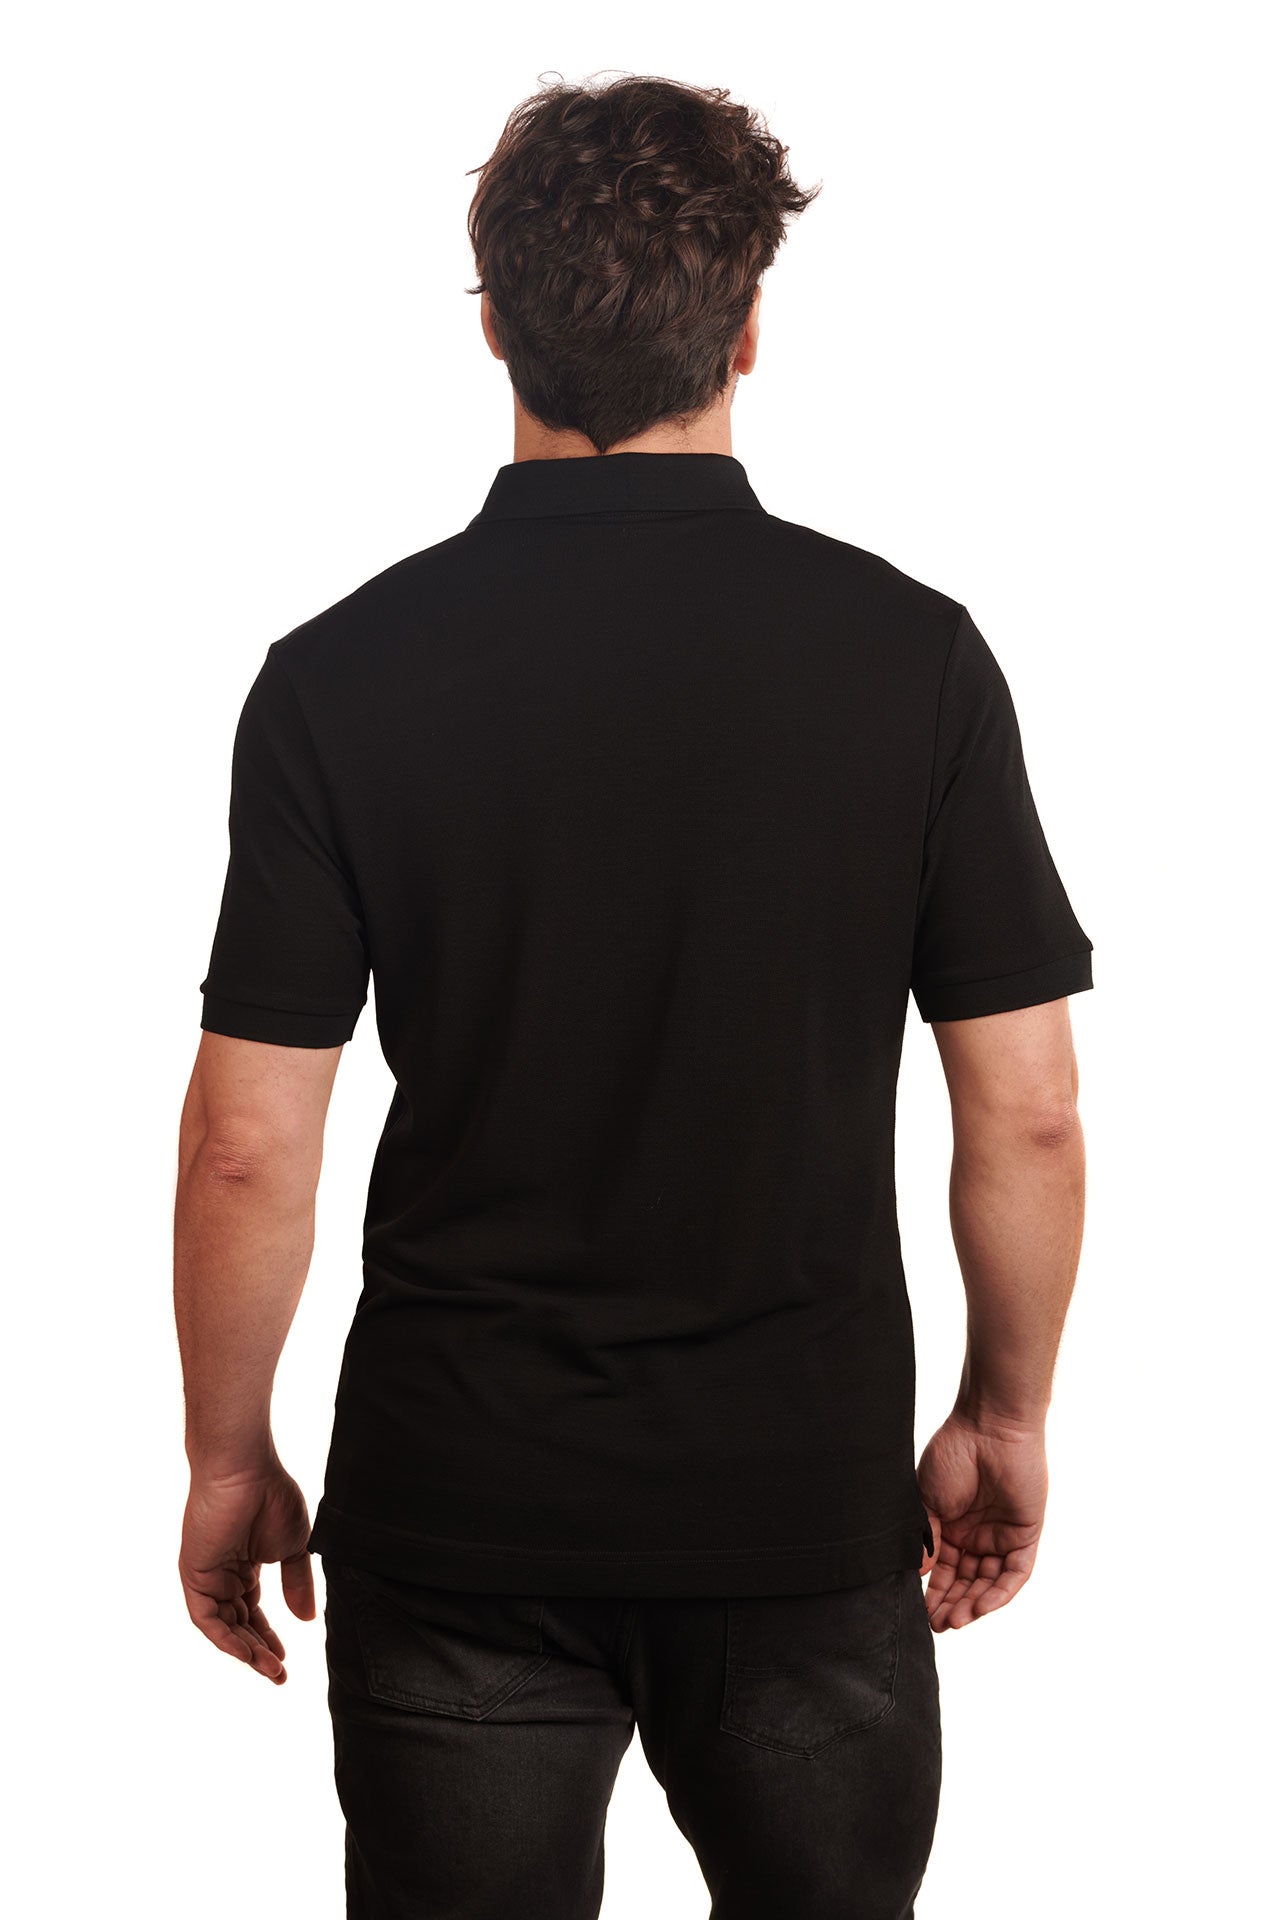 pitch-black-biodegradable-pure-merino-wool-golf-polo-shirt-for men-by-snöleo.-back-of-model-view.